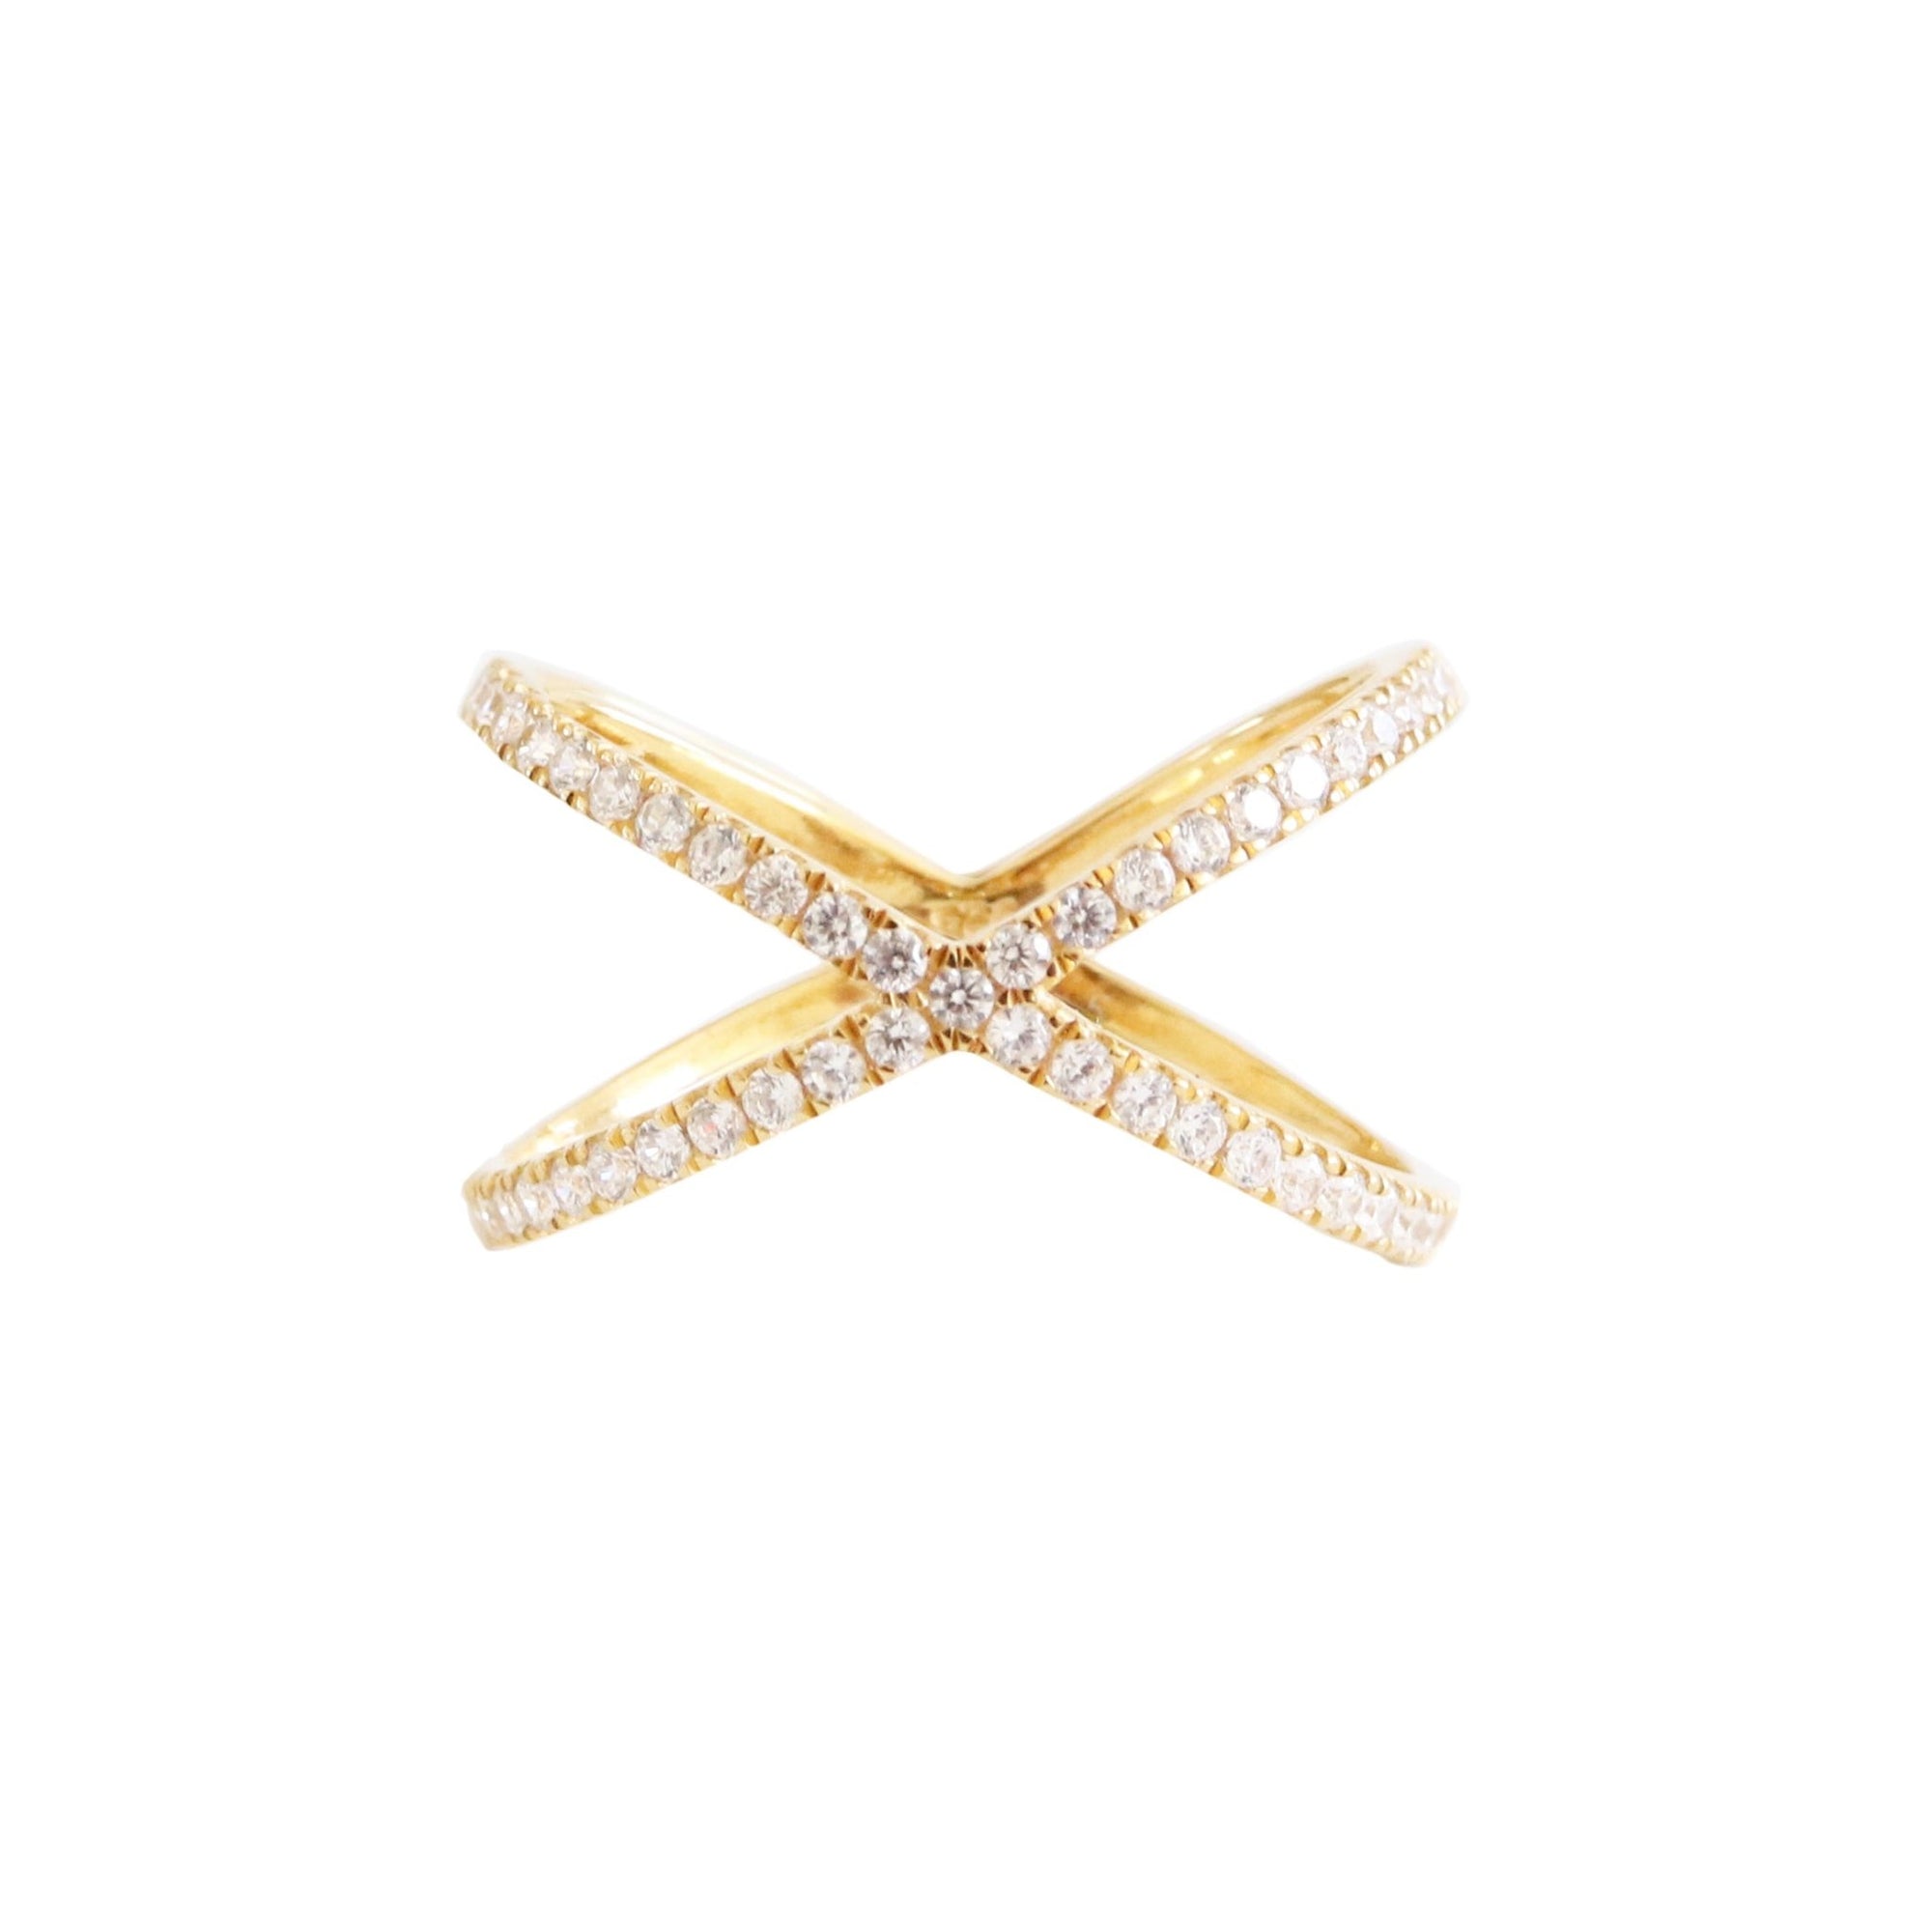 STAR CROSSED LOVE BAR RING - CUBIC ZIRCONIA & GOLD - SO PRETTY CARA COTTER